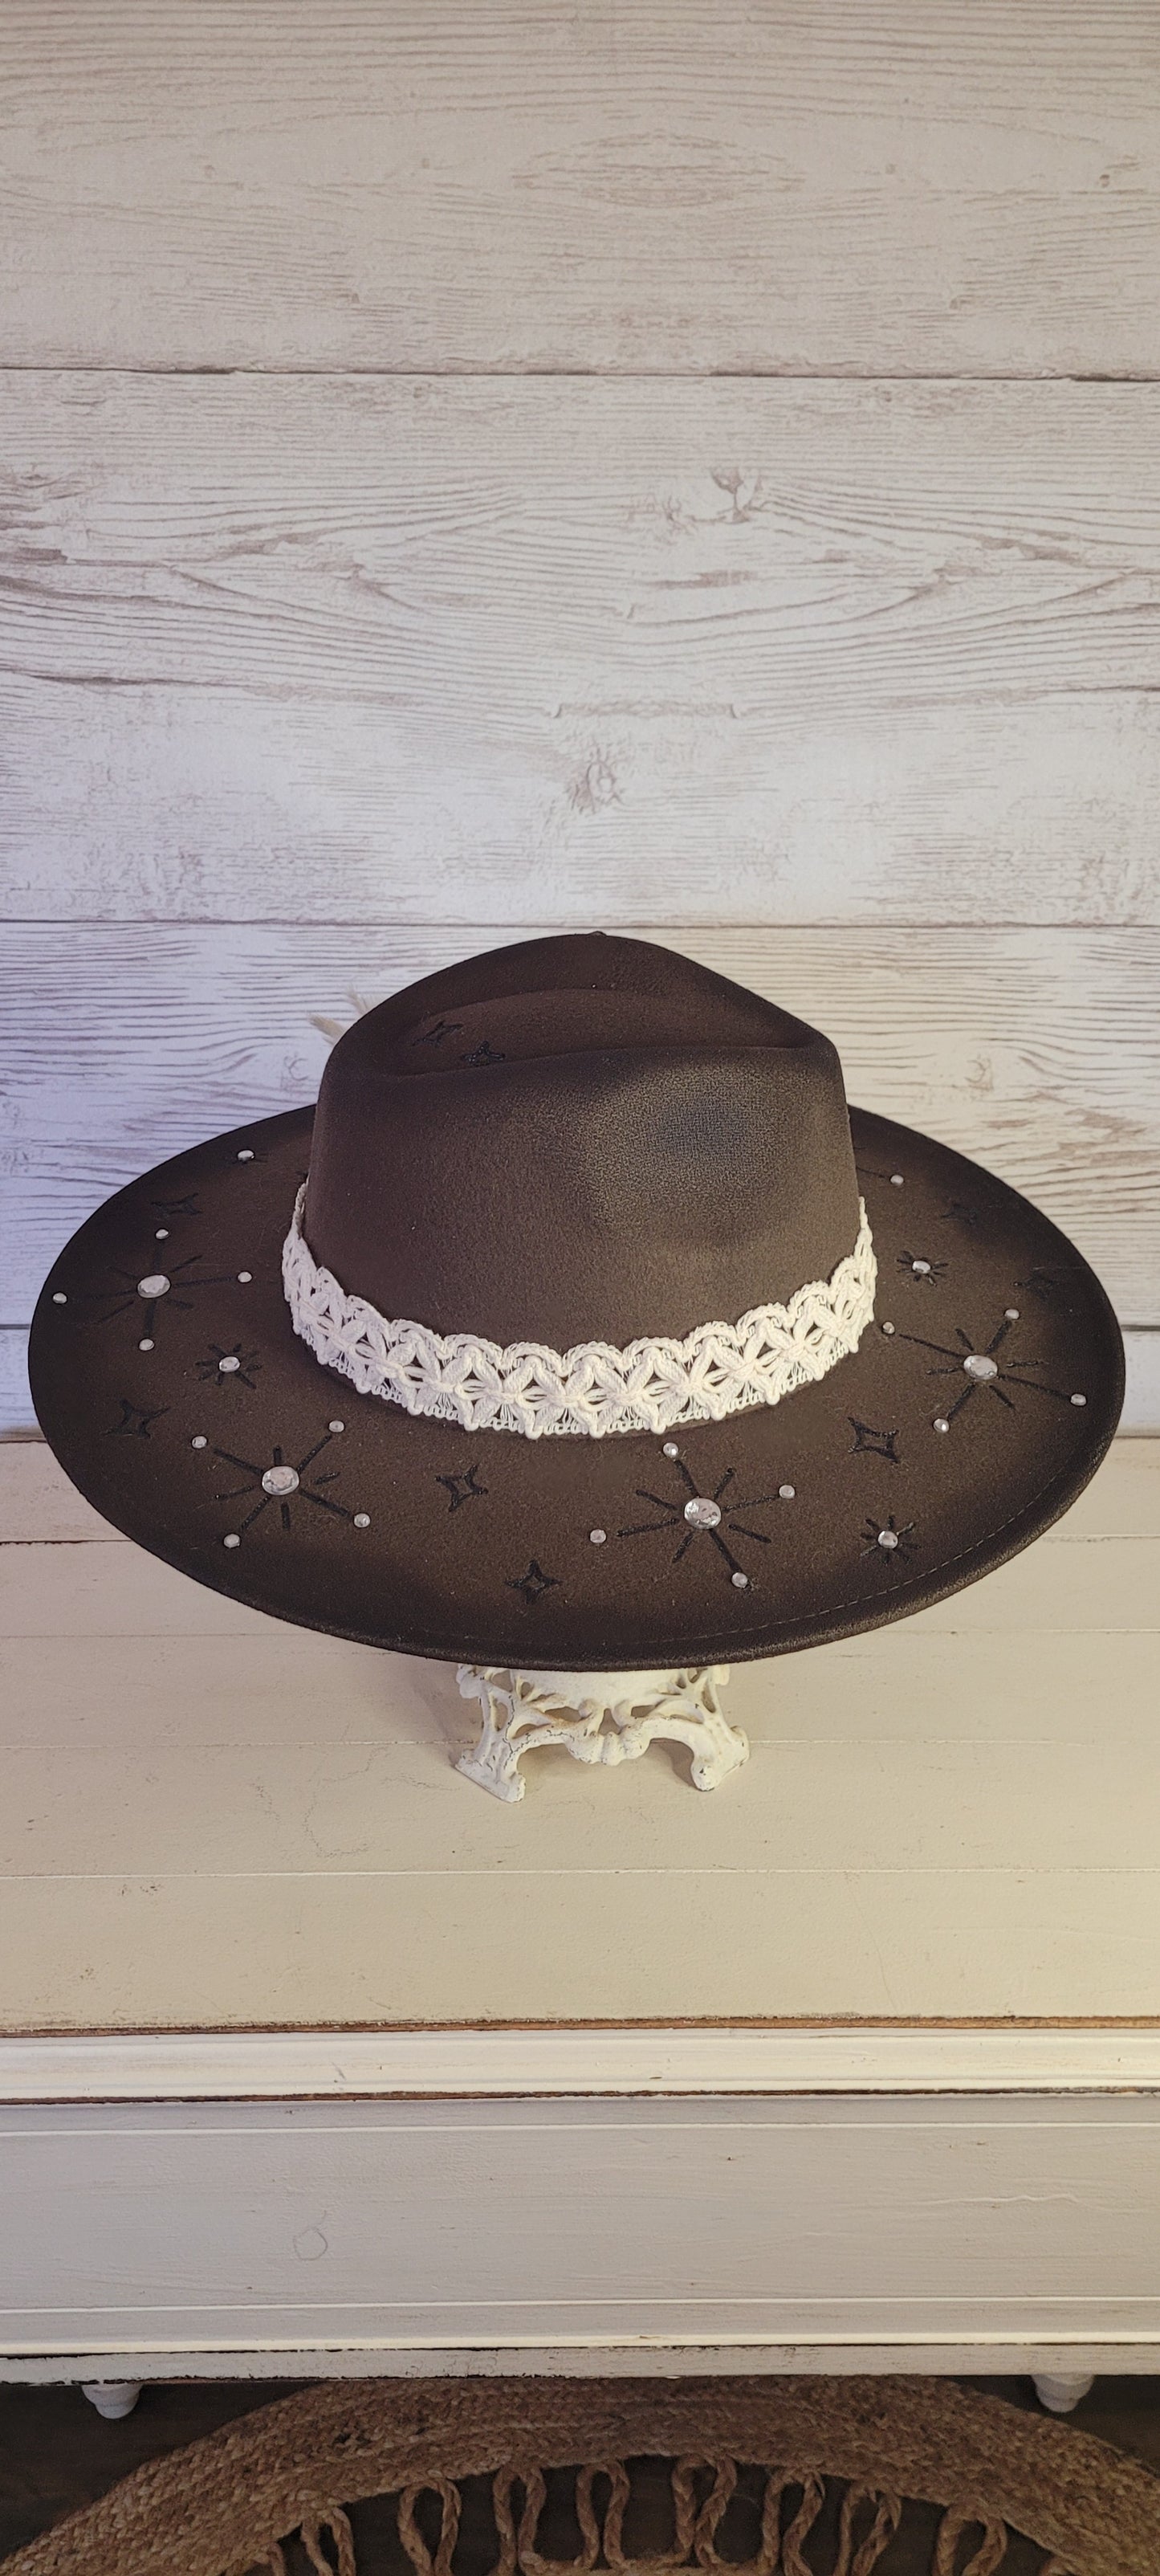 Features engraved stars & diamonds Rhinestone details throughout, pampas, crystal brooch, & playing card Felt hat Flat brim 65% polyester and 35% cotton Ribbon drawstring for hat size adjustment Head Circumference: 24" Crown Height: 5" Brim Length: 15.75" Brim Width: 14.5" Branded & numbered inside crown Custom designed by Kayla